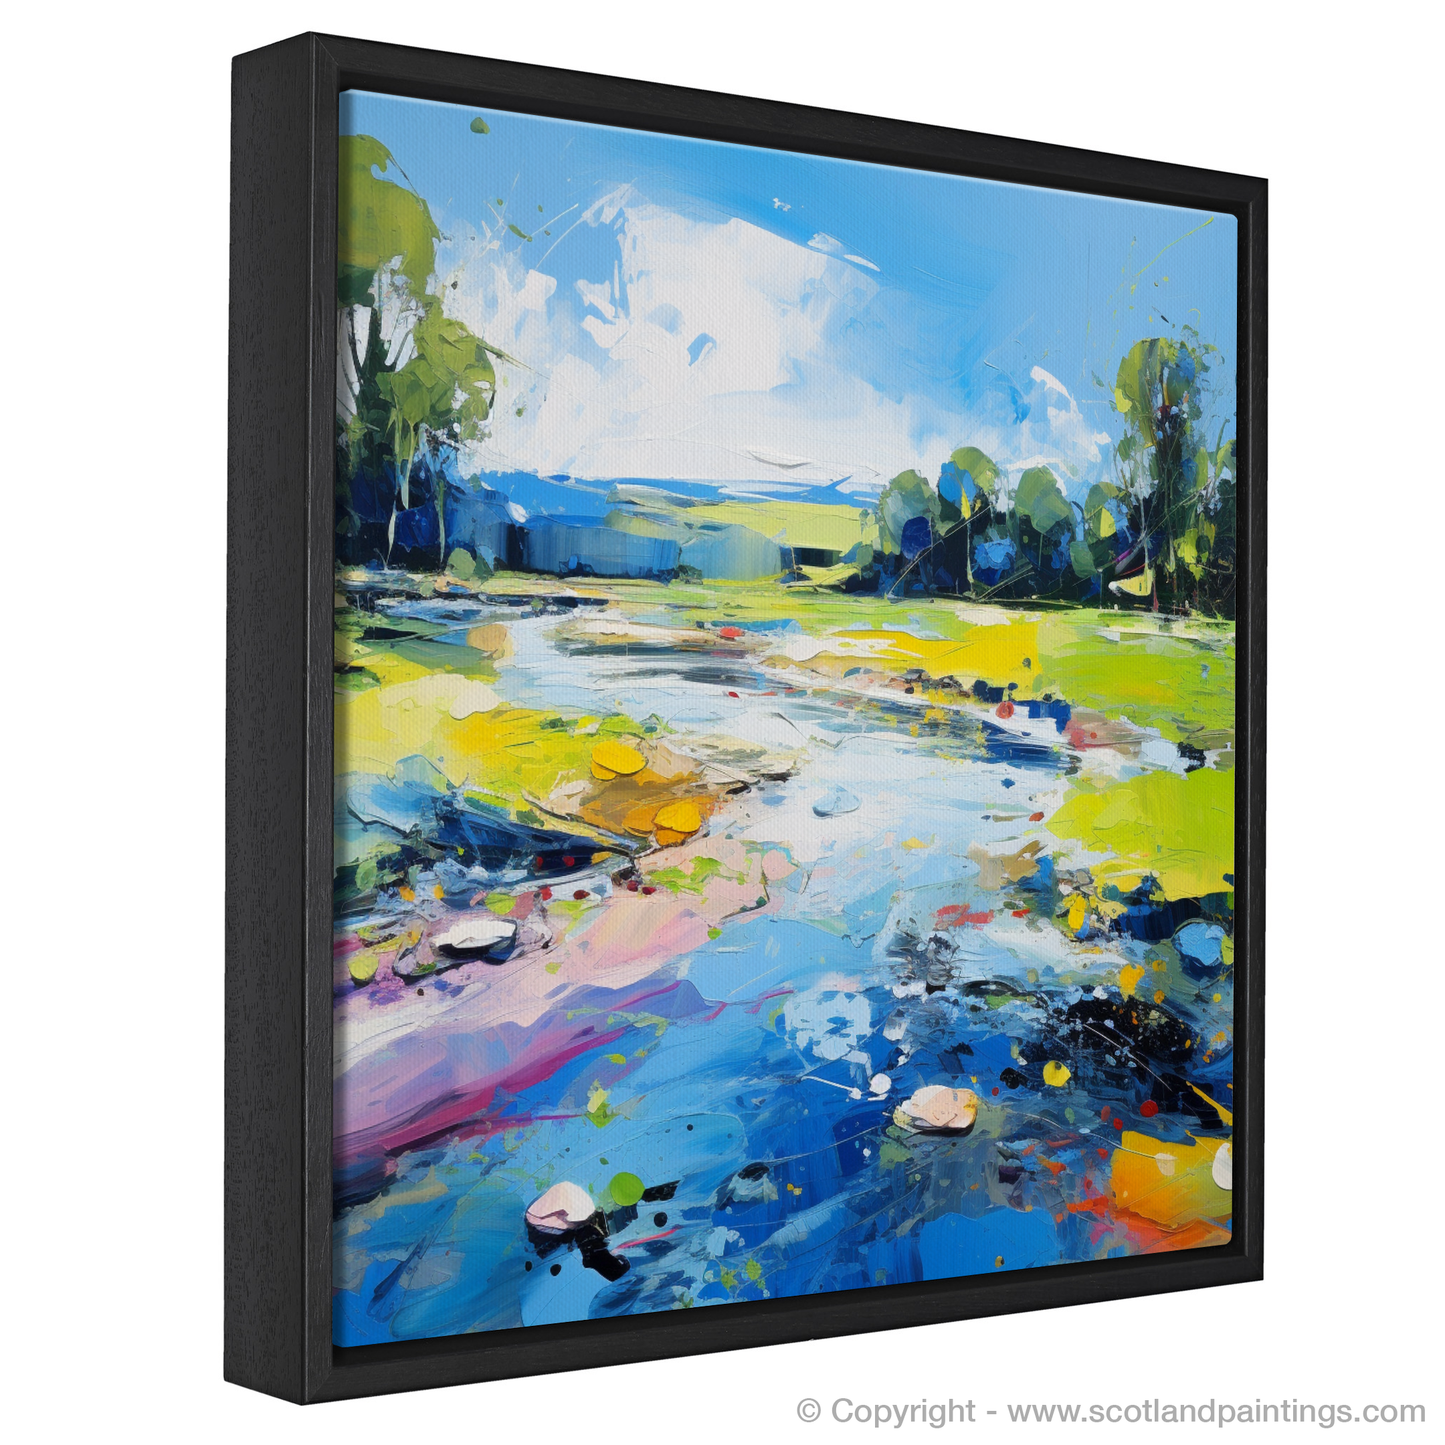 Painting and Art Print of River Dee, Aberdeenshire in summer entitled "Summer Rhapsody on the River Dee".